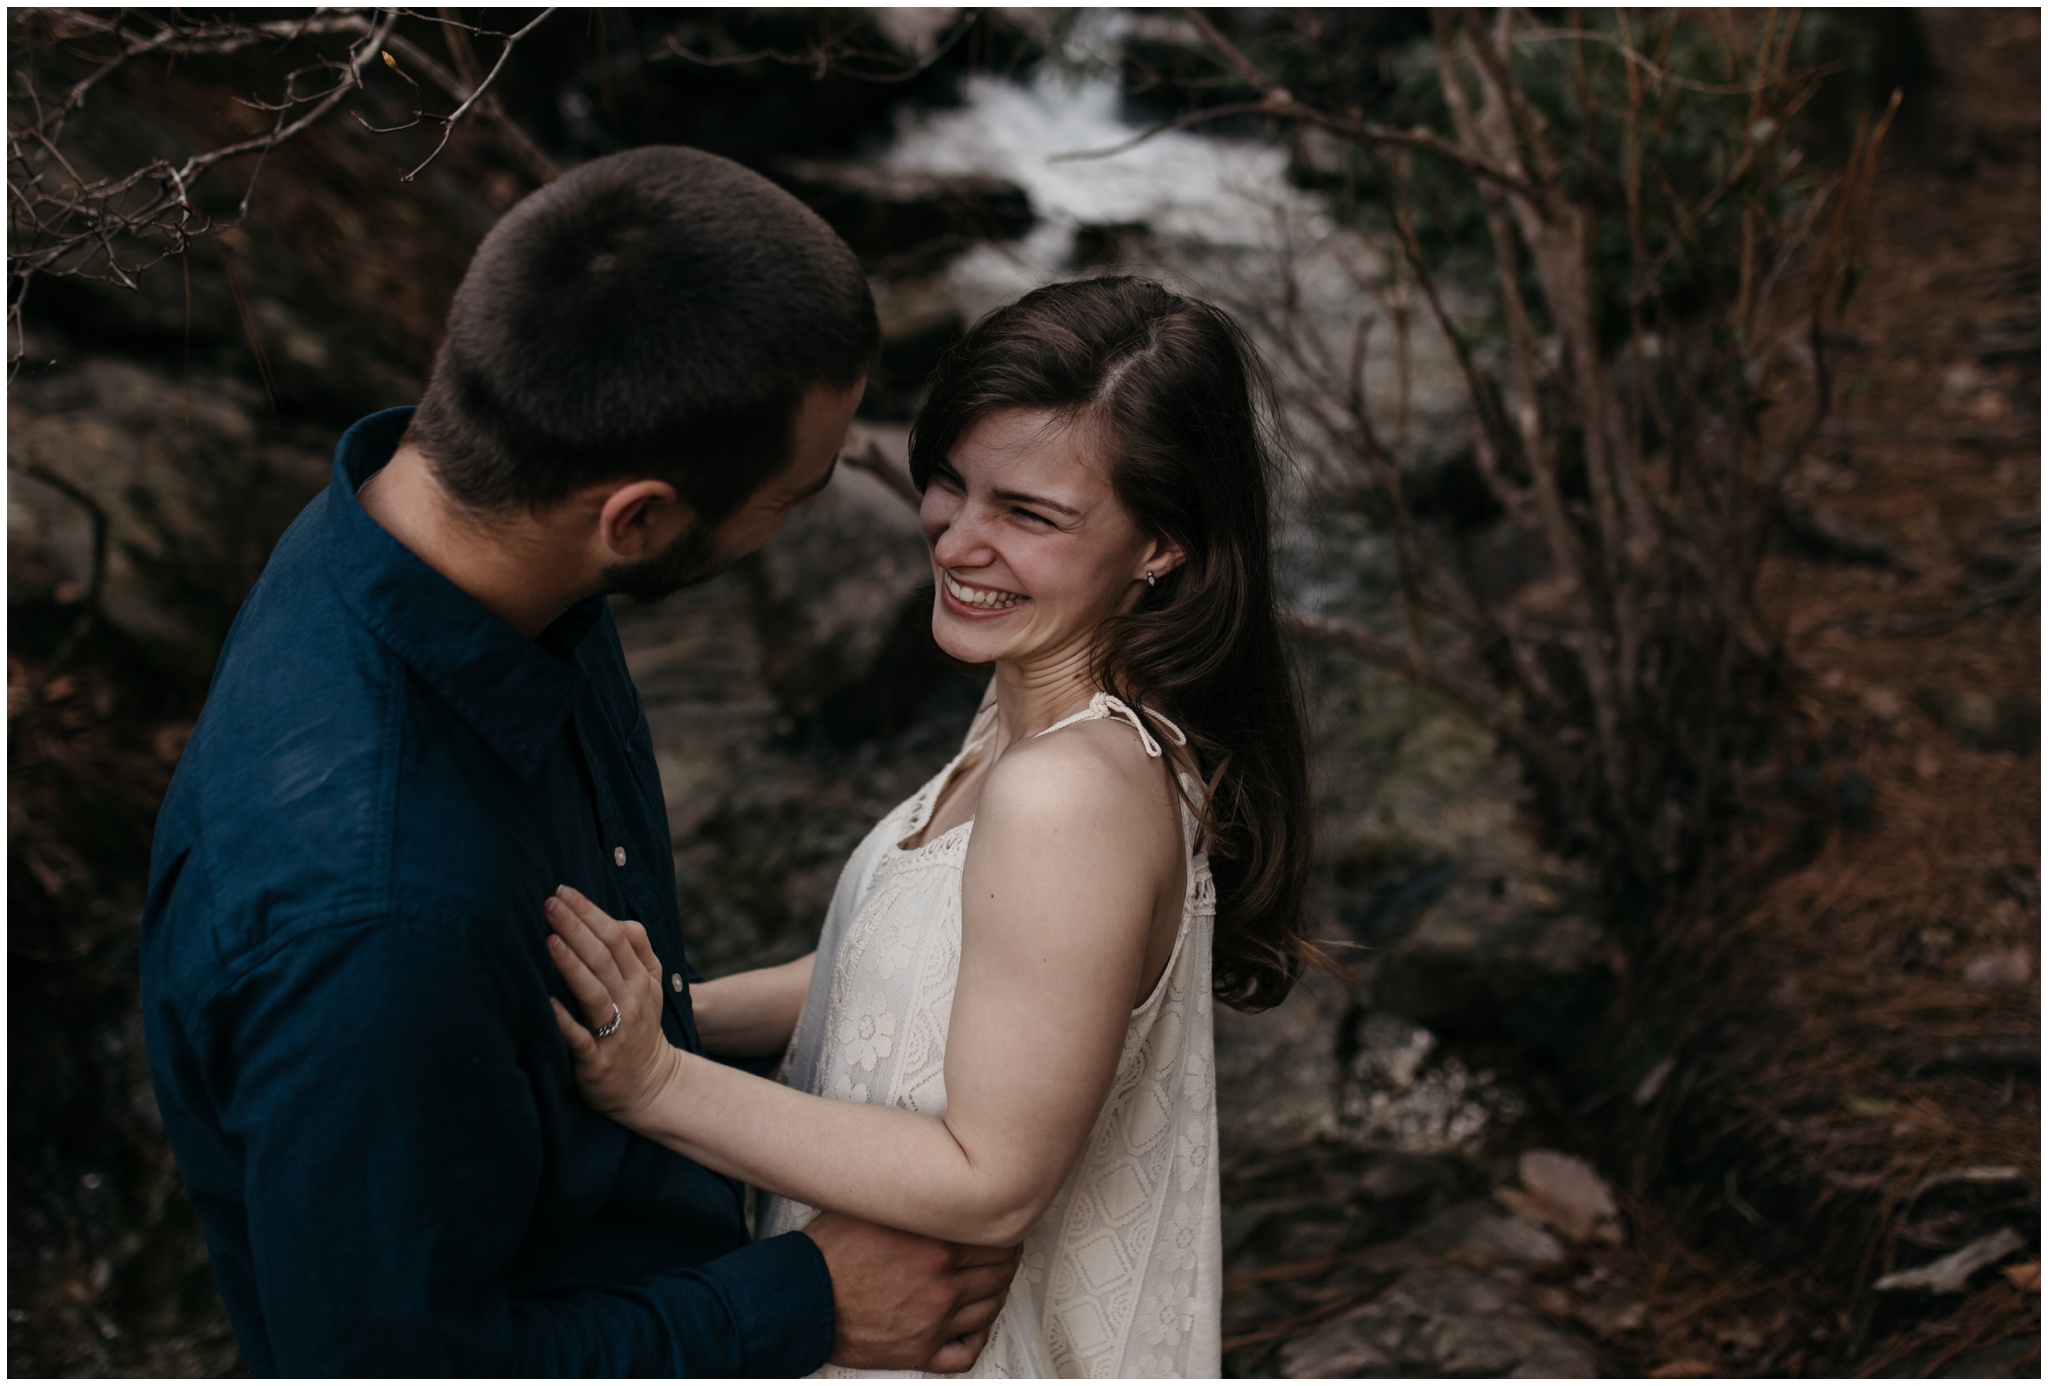 The Morros Photography Maddie and Jake Engagament session at Oak Mountain State Park Alabama_0116.jpg